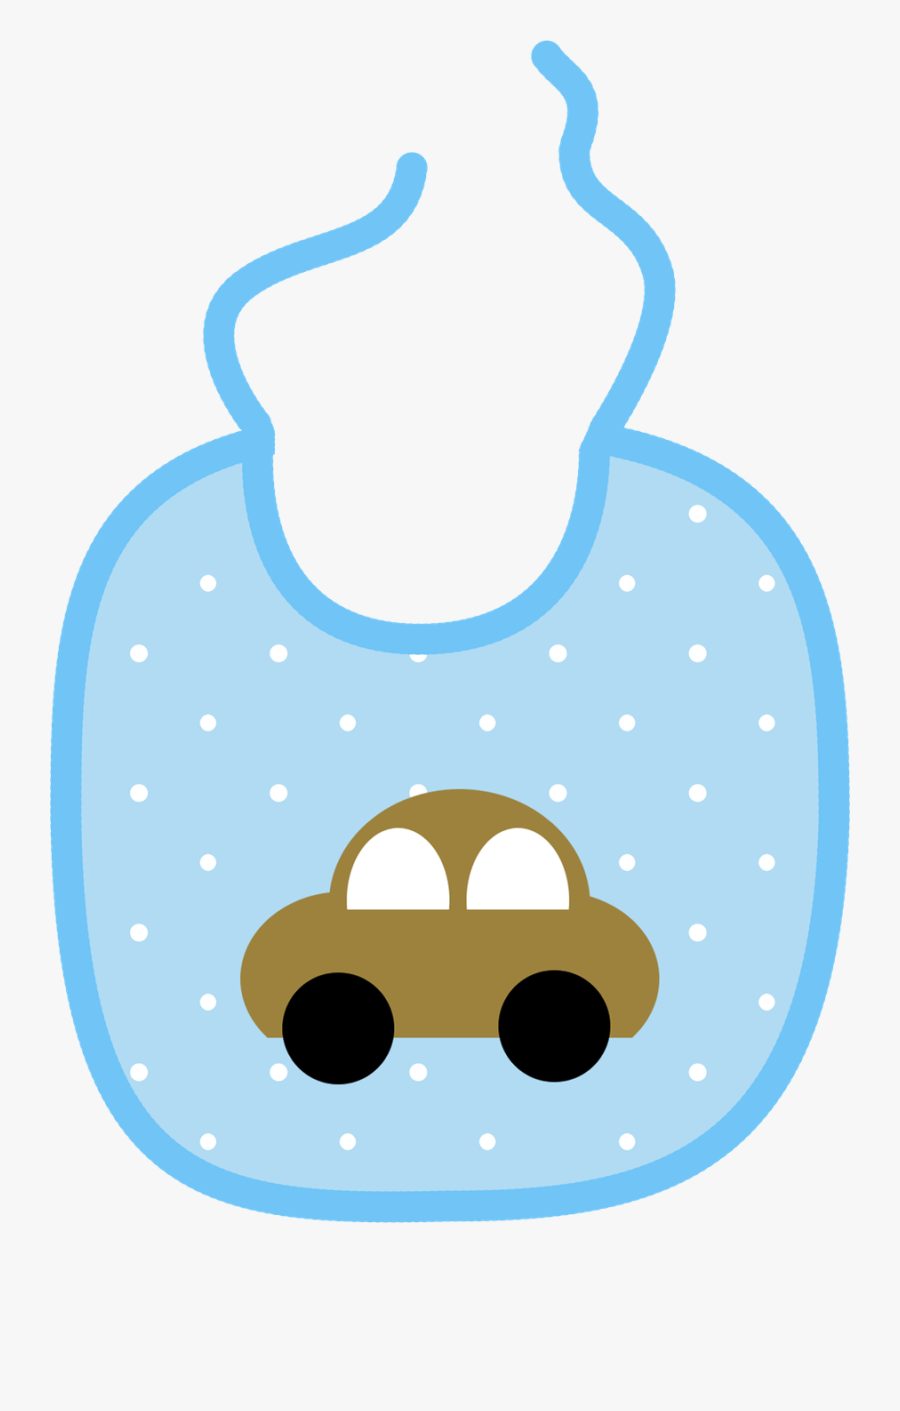 Freeuse Stock Baby In Blanket Clipart - Baby Bib Clipart, Transparent Clipart